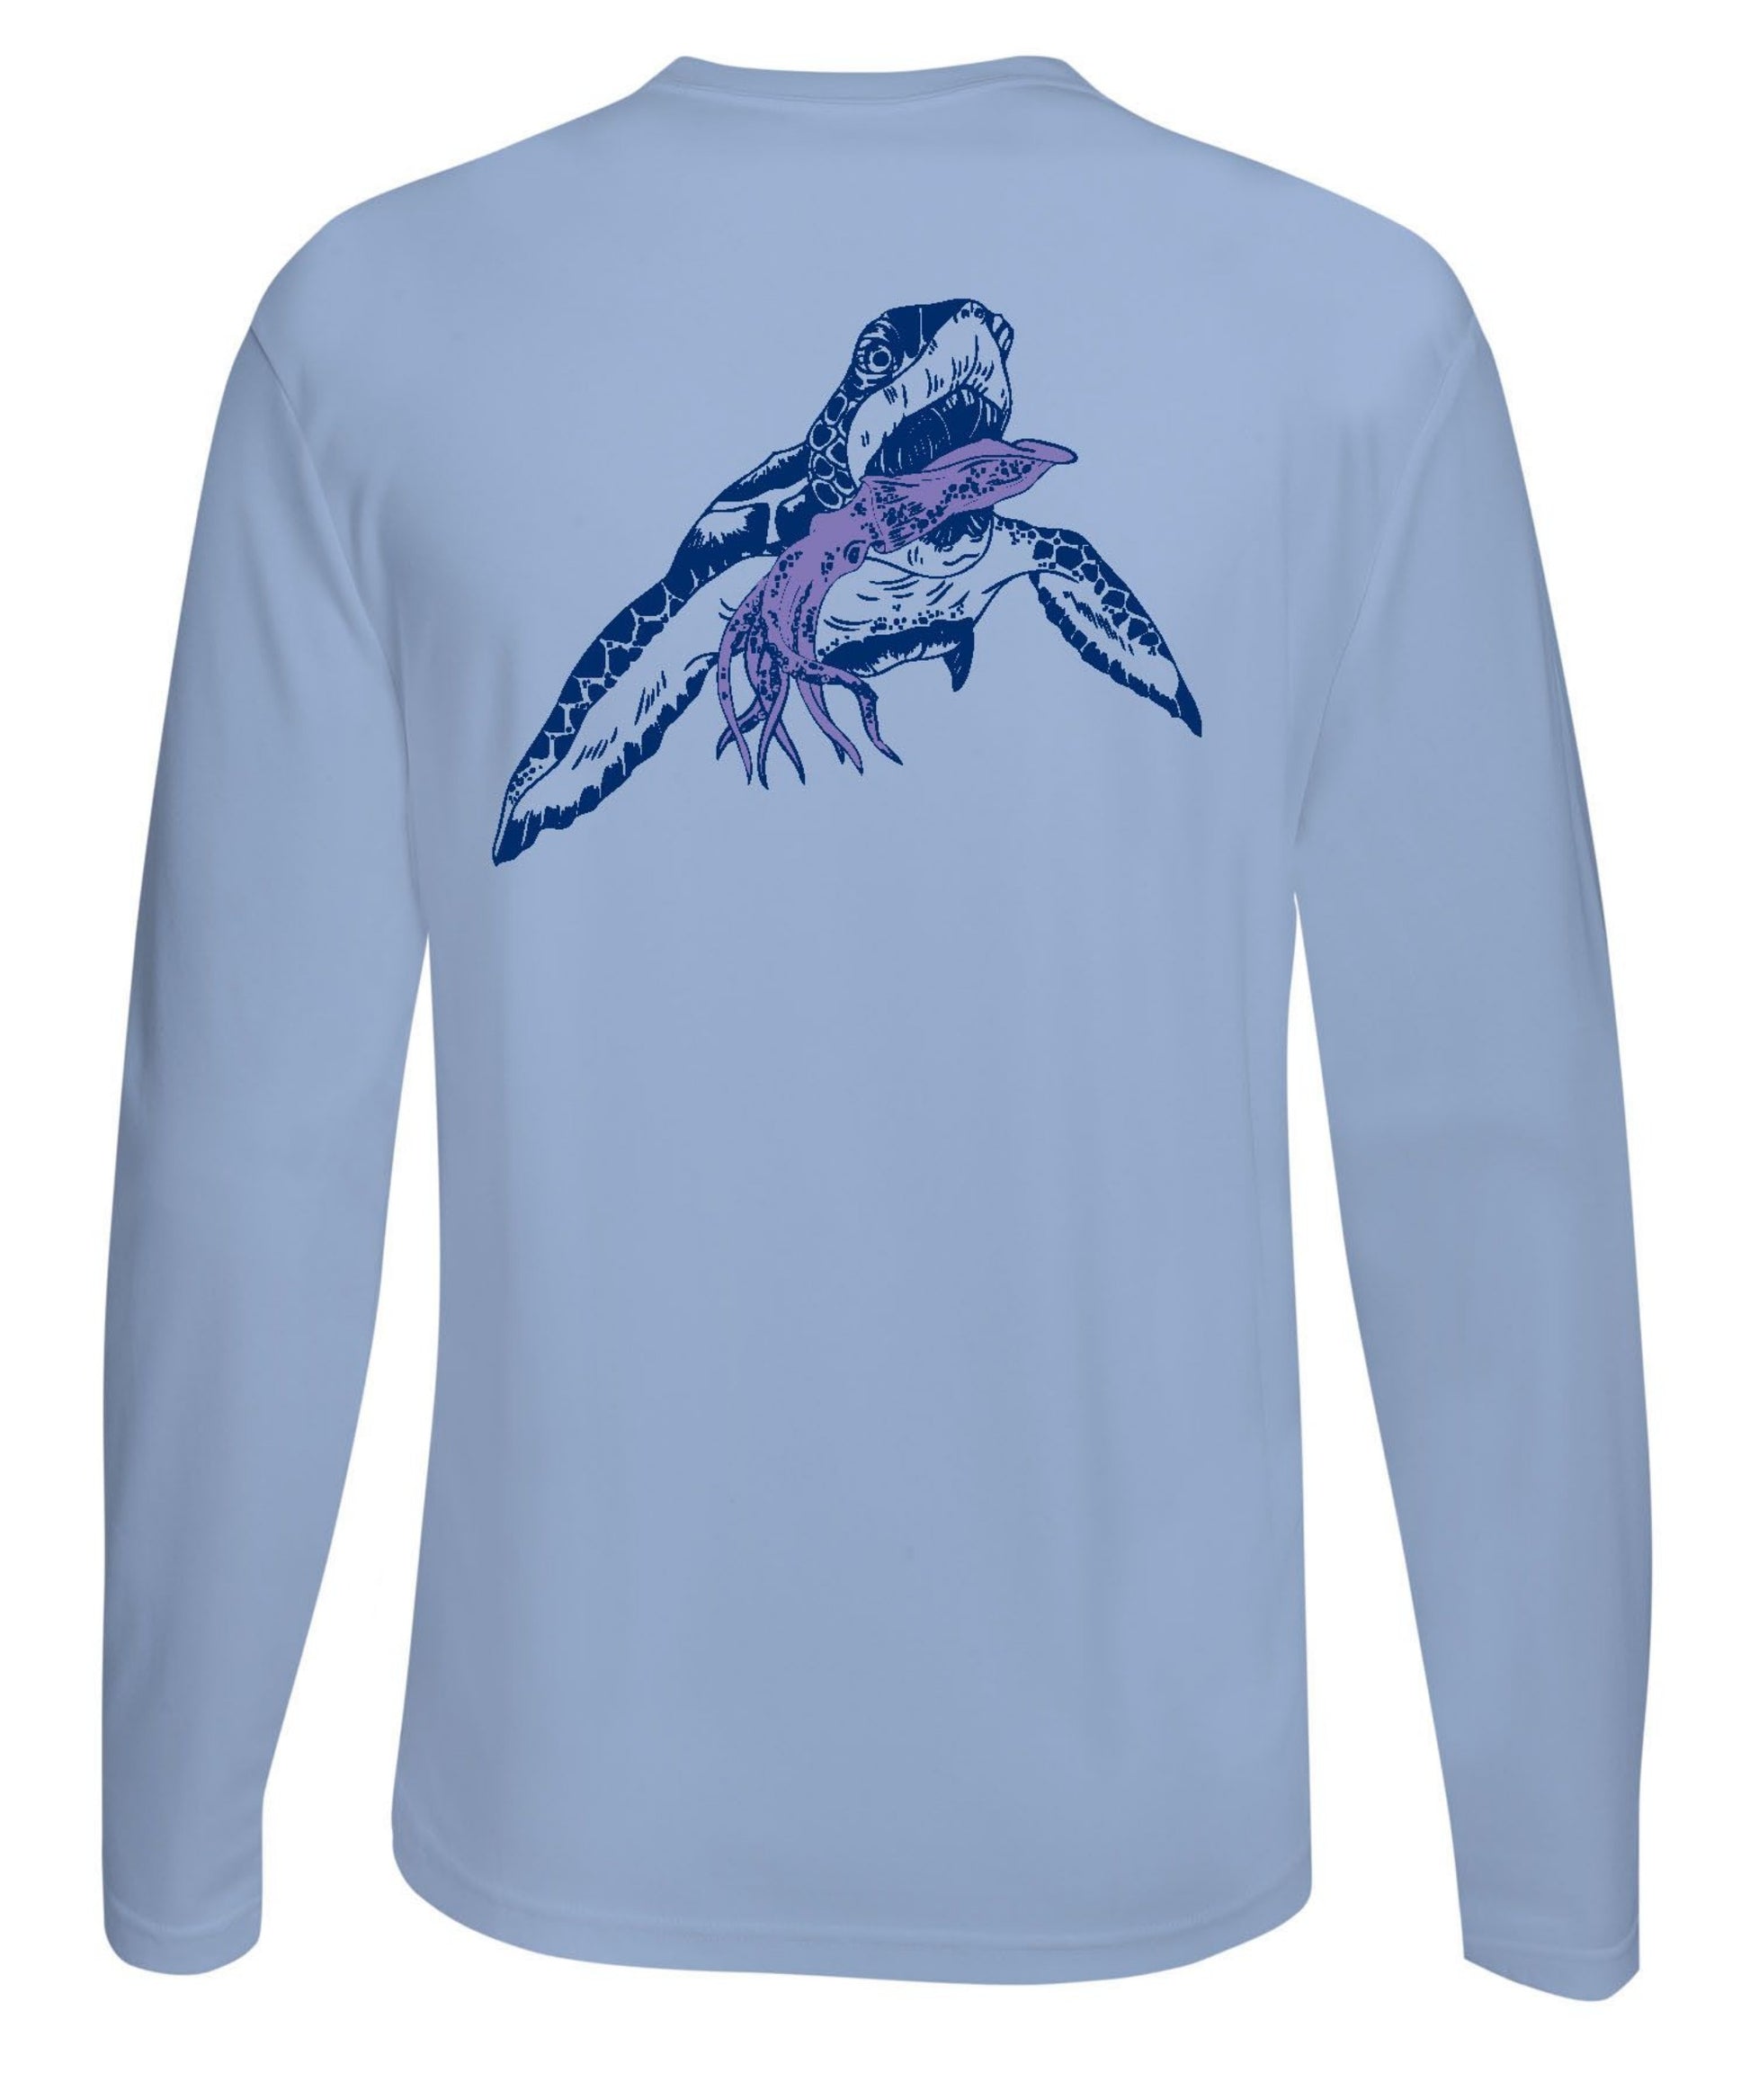 Turtle with Squid Performance Fishing Dry-Fit Long Sleeve with Sun Protection - Lt. Blue